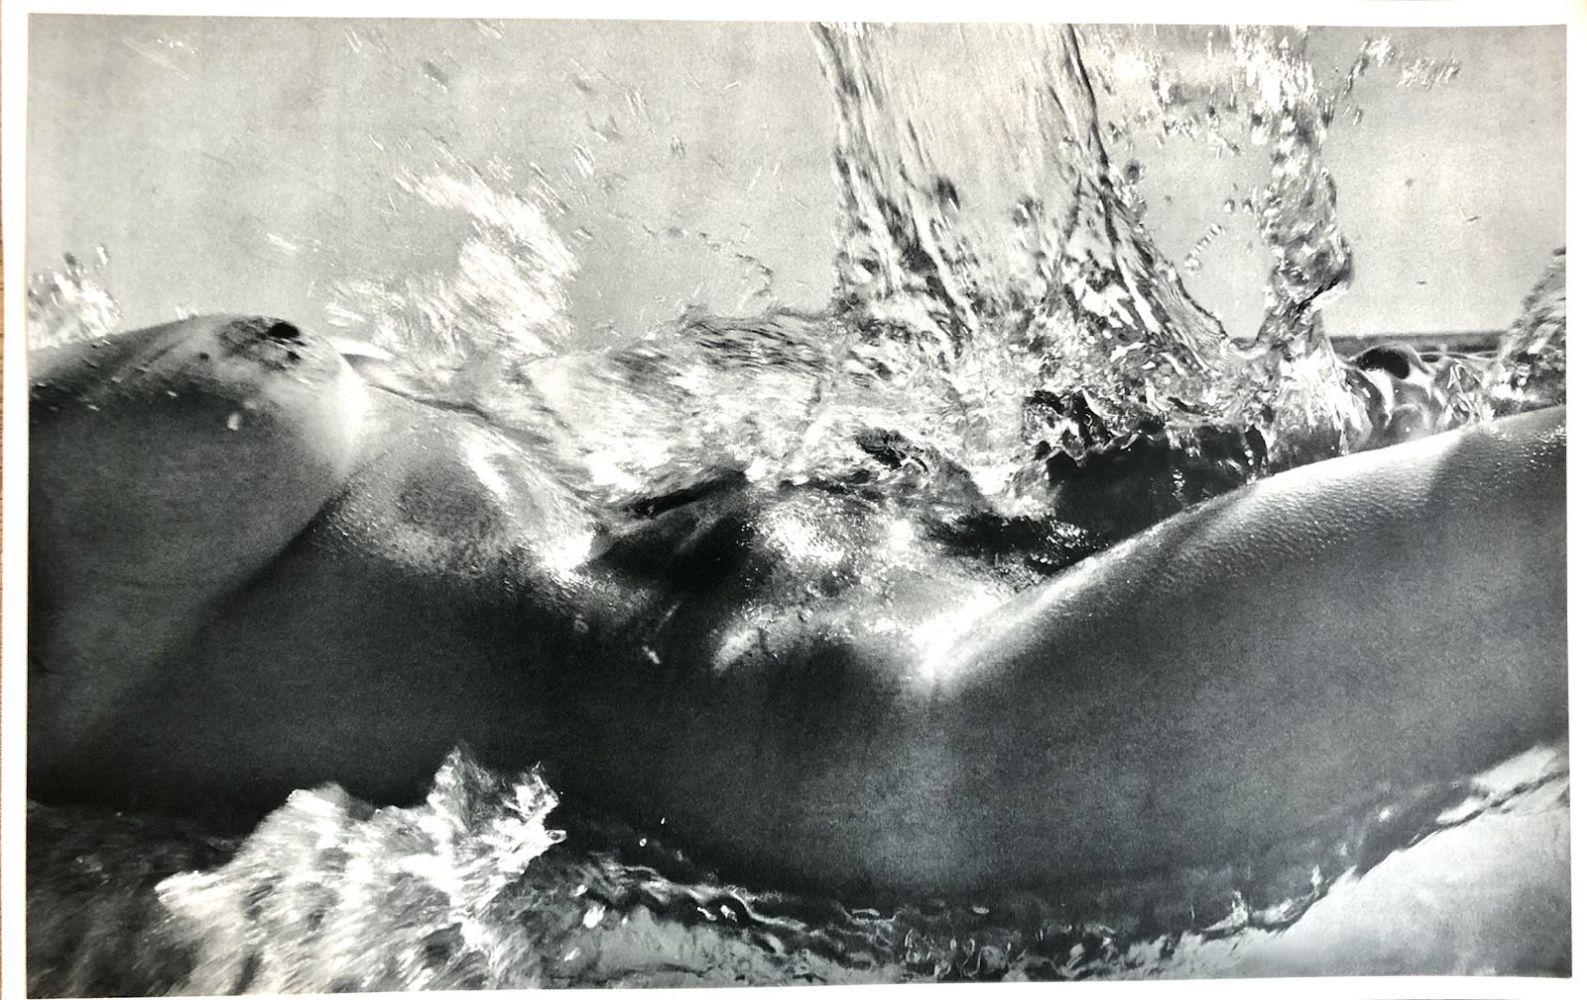 Artwork by Lucien Clergue, Née de la Vague (Born of the Waves), Made of Heliogravure mounted on